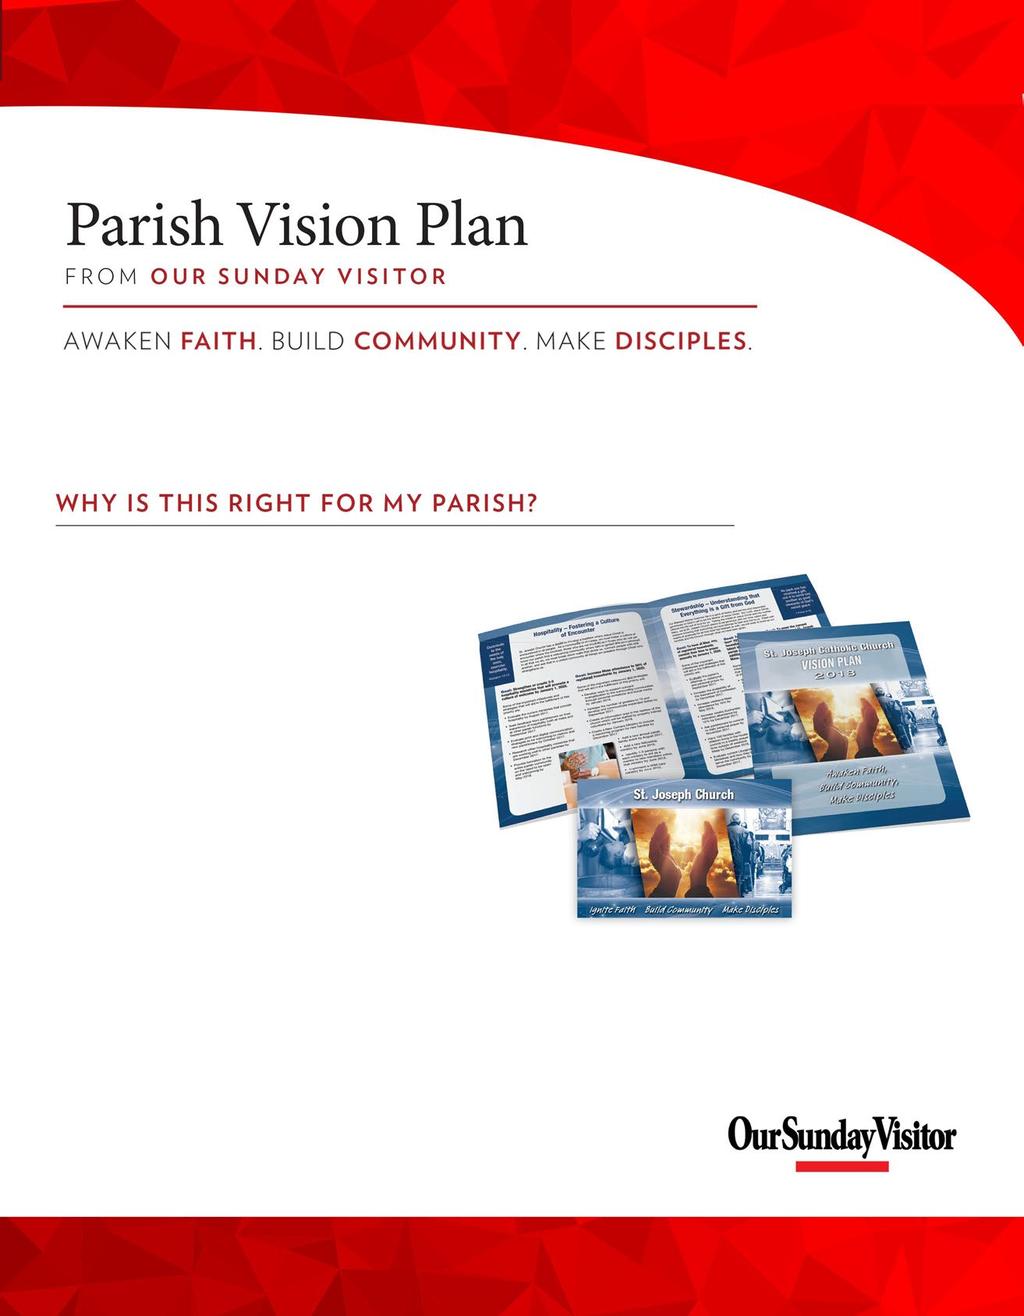 Our Sunday Visitor s Parish Vision Plan is a plan with specific goals and established milestones designed to awaken faith, build community, make disciples, and most